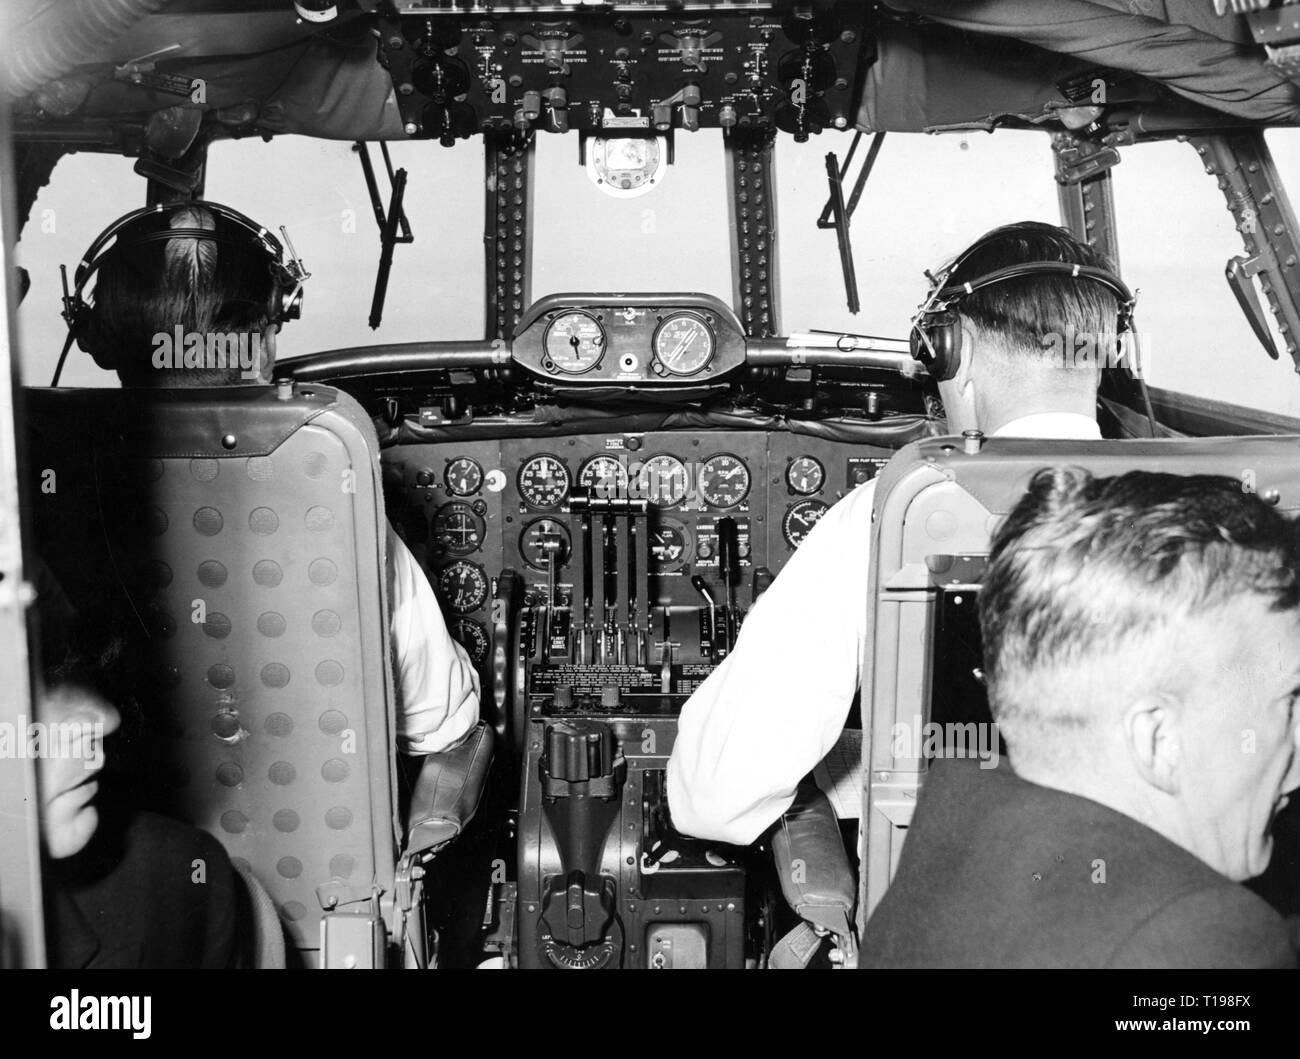 transport / transportation, aviation, staff, flying staff, pilot, copilot and radio operator, cockpit an aircraft of the German Lufthansa, mid 1950s, Additional-Rights-Clearance-Info-Not-Available Stock Photo